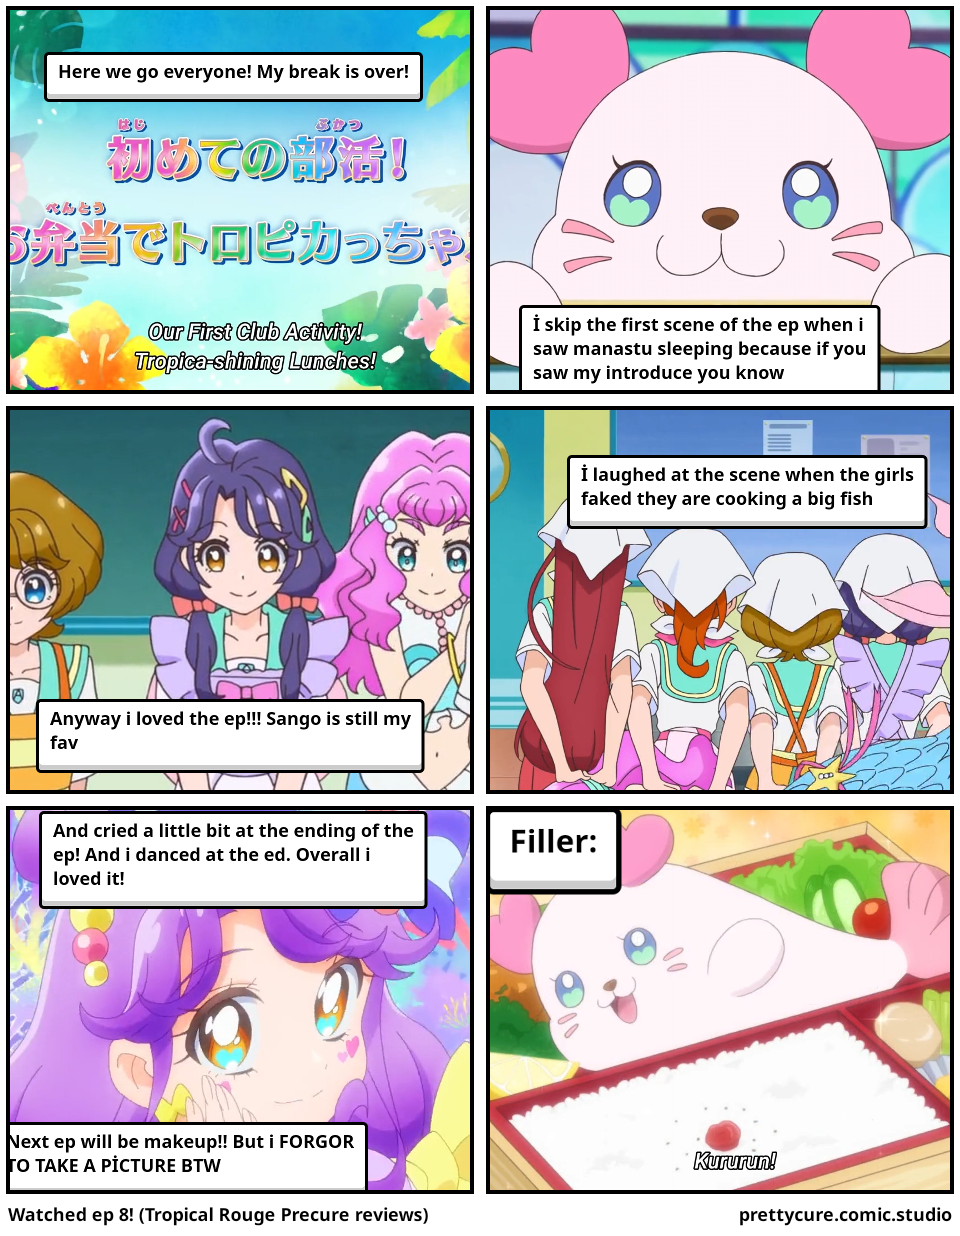 Watched ep 8! (Tropical Rouge Precure reviews)